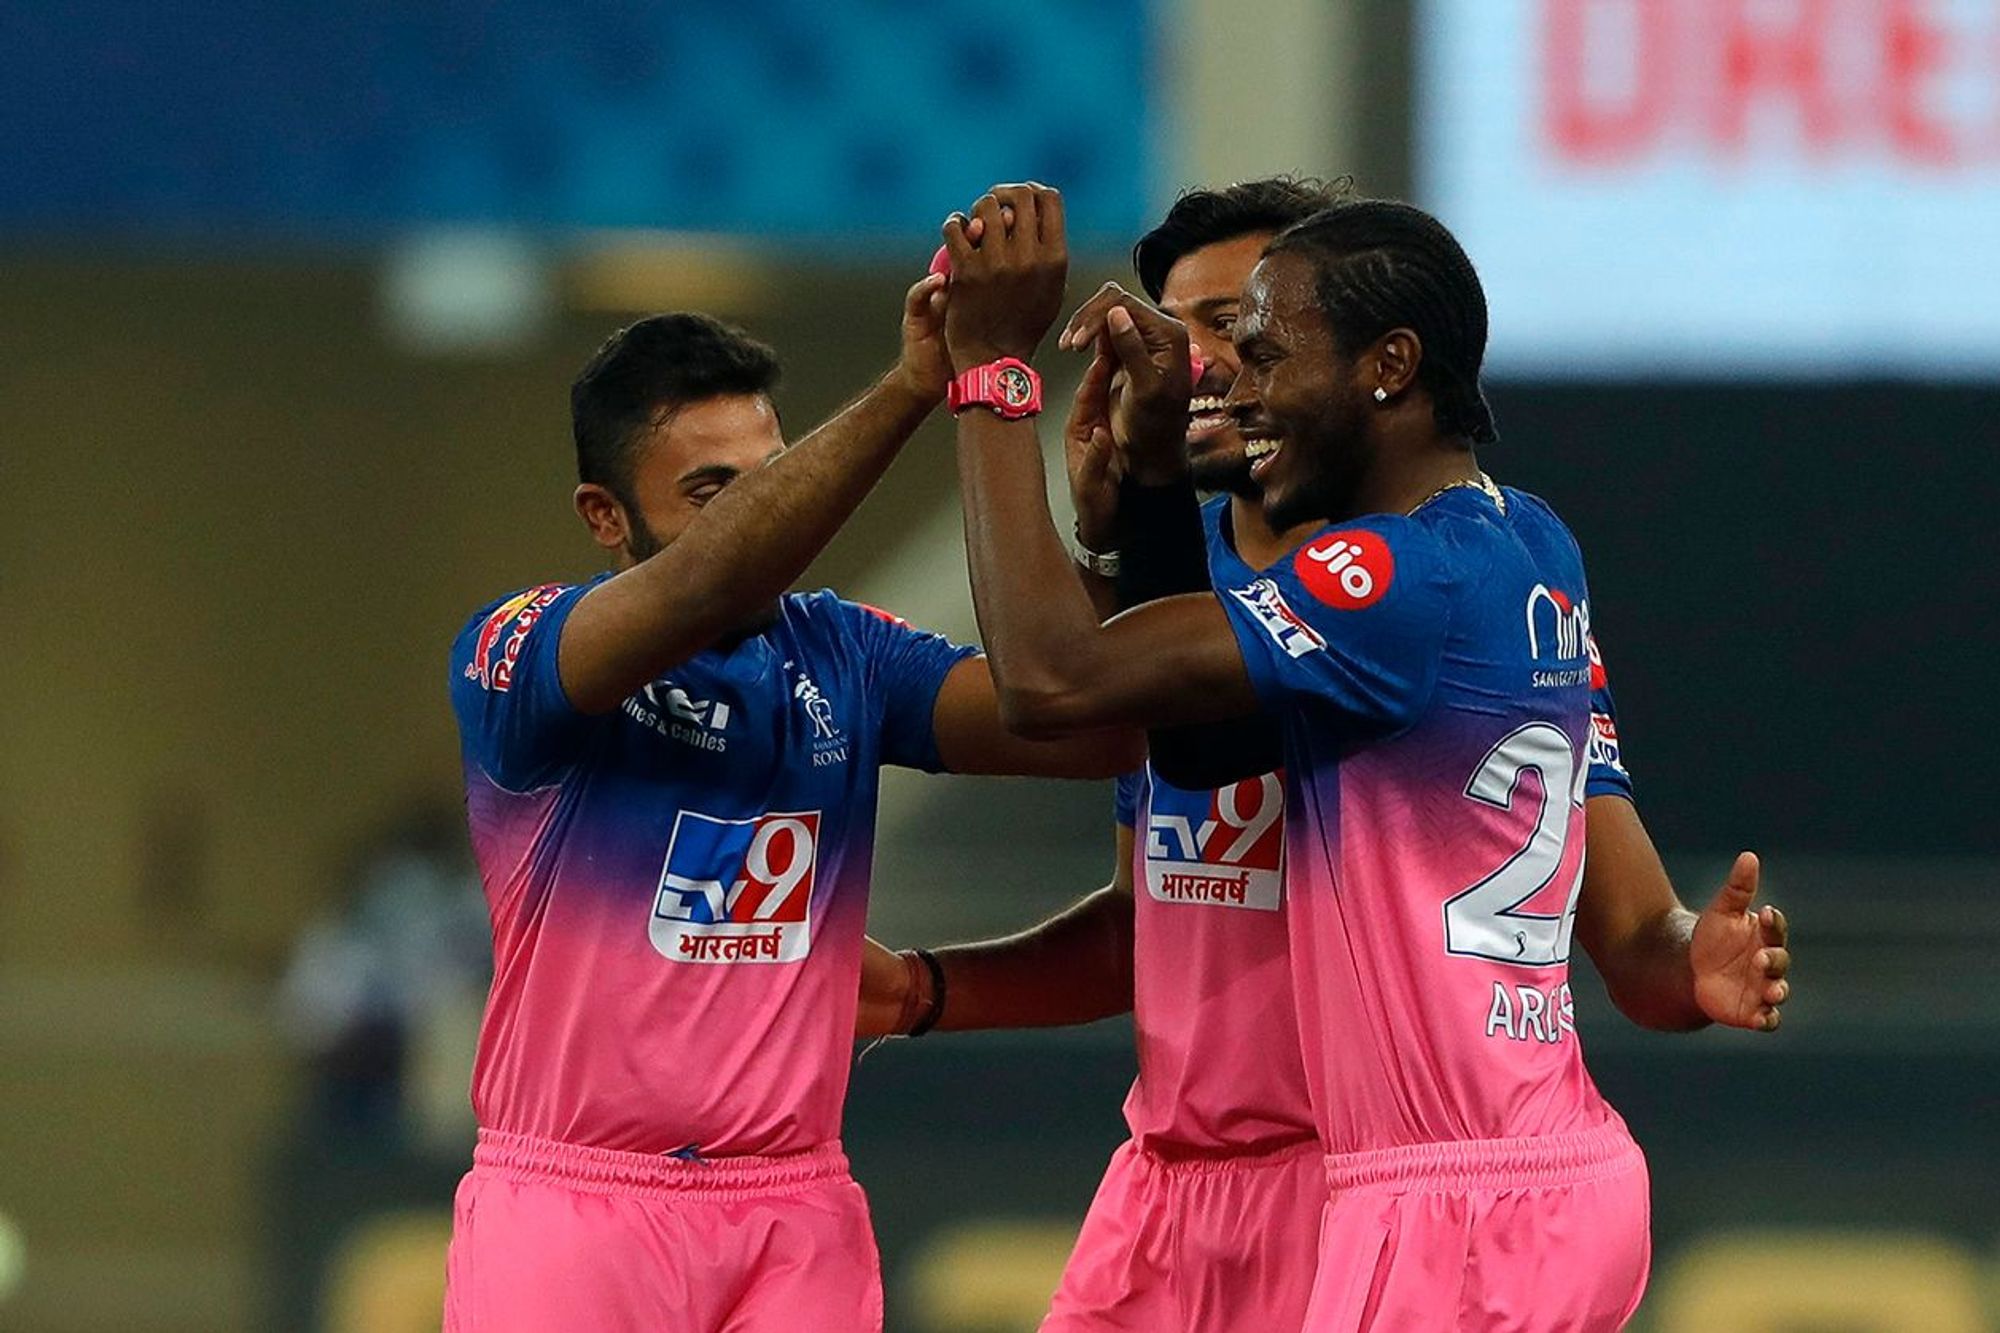 IPL 2020 Review | Rajasthan Royals - A season of over-promised inadequate dynamism coming to nuts